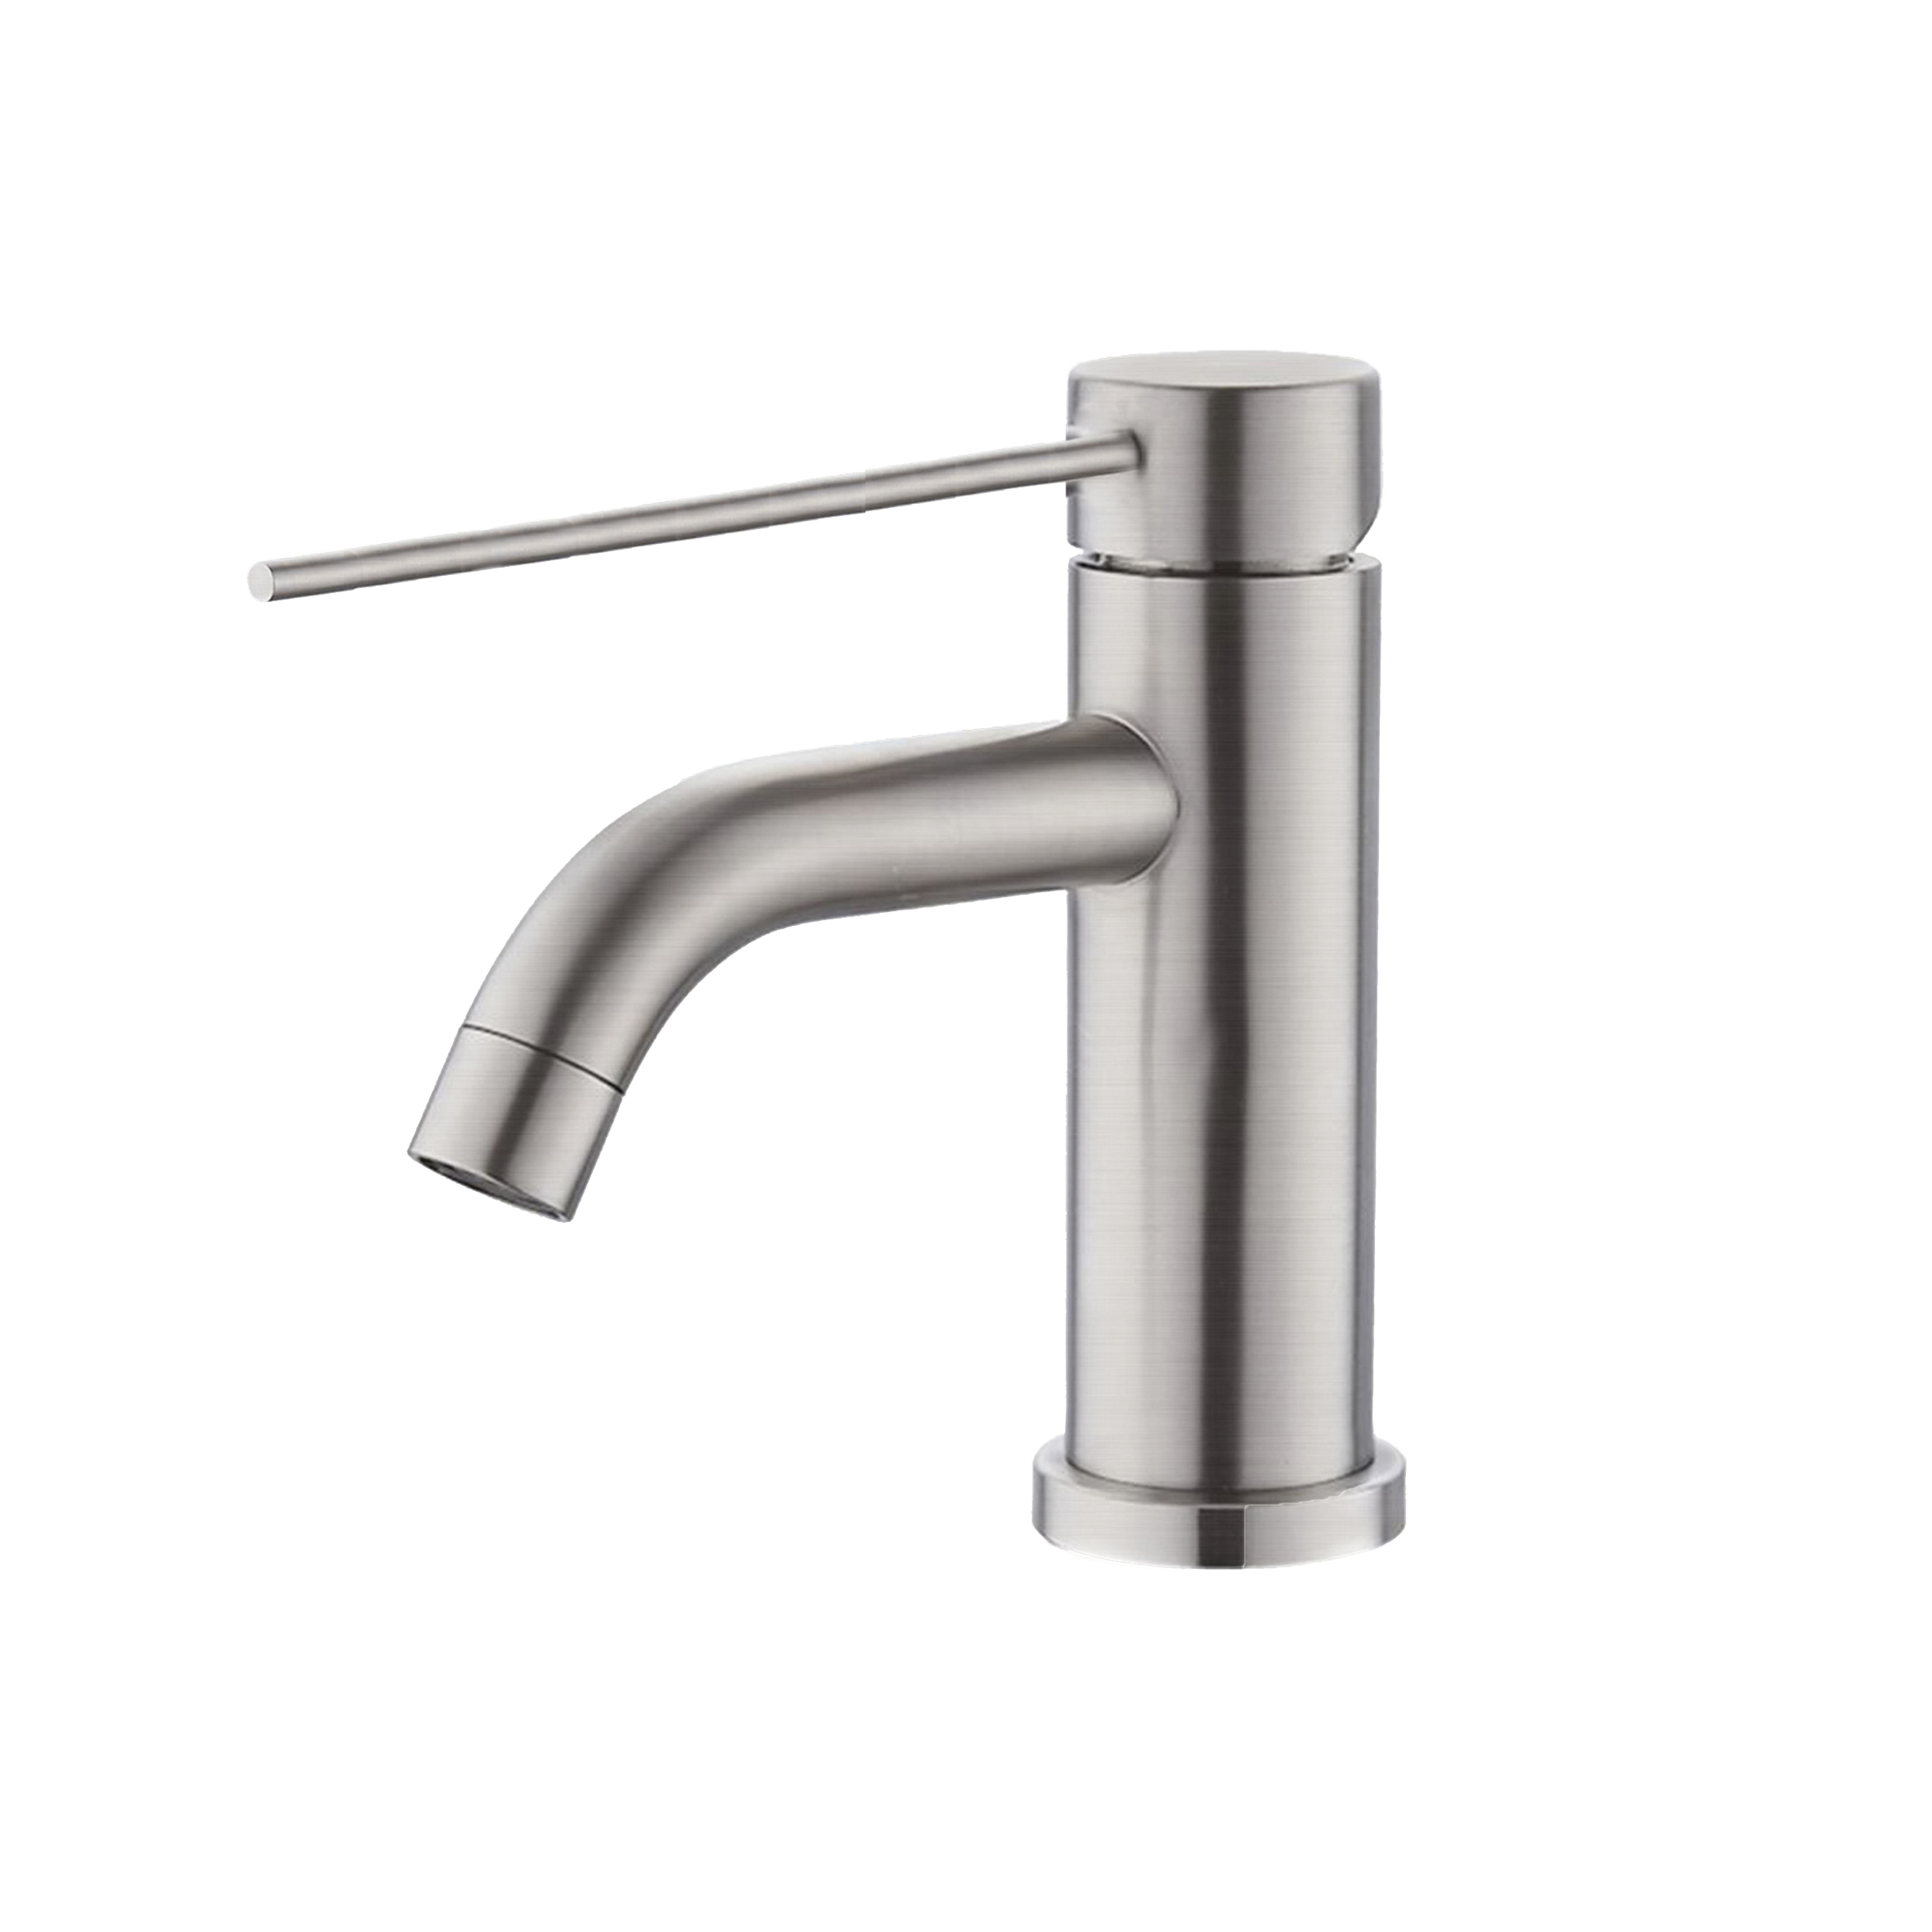 City Life Inox Care Basin Mixer 170mm Extended Lever